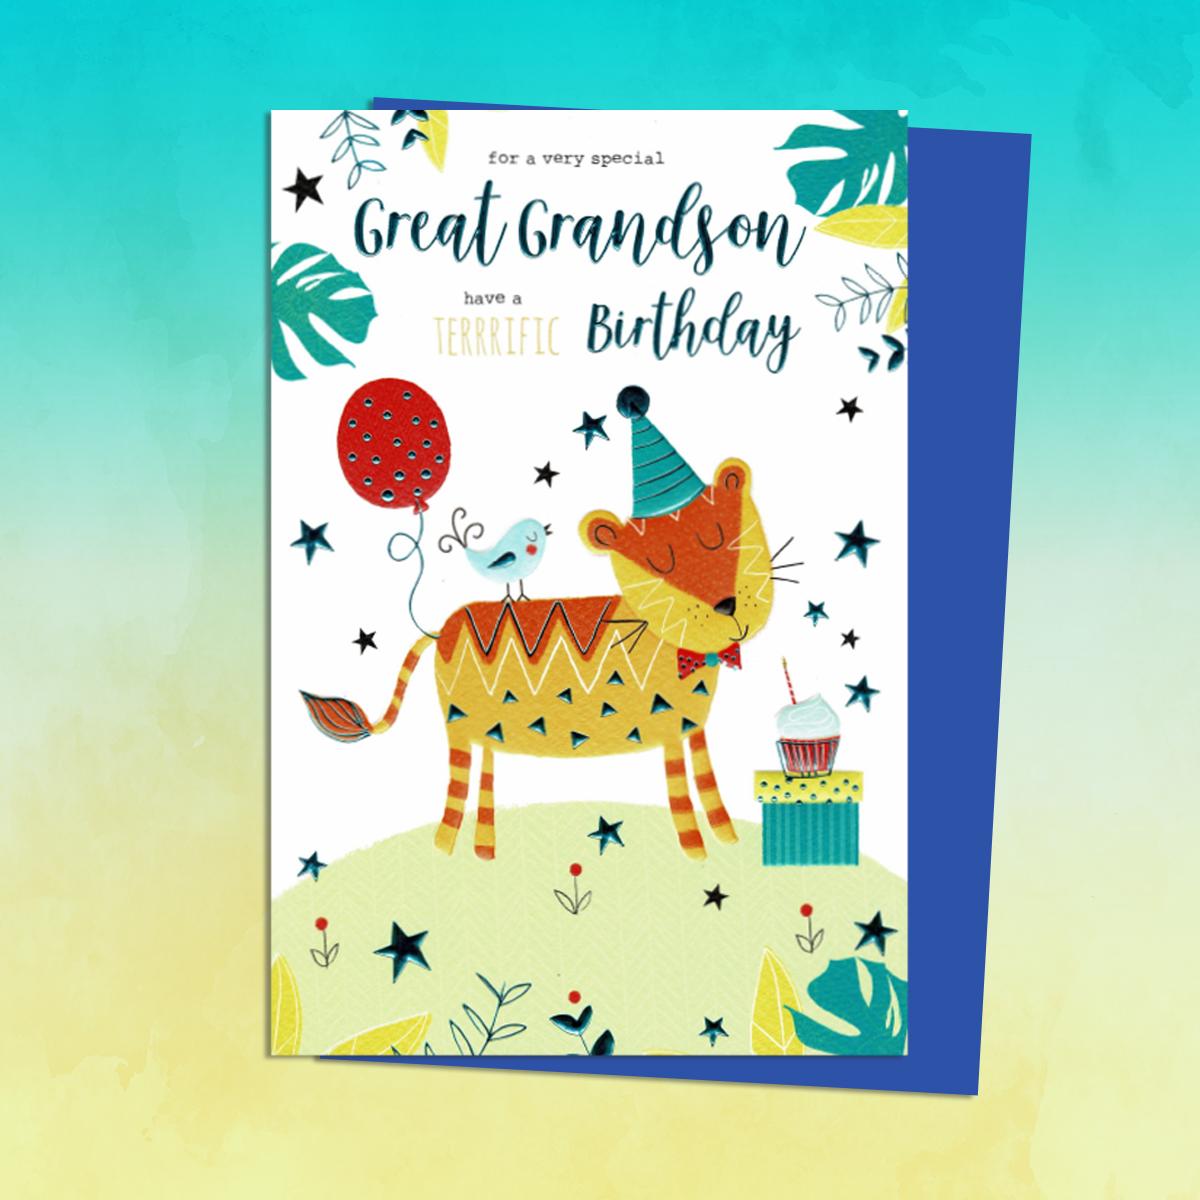 Great Grandson Birthday Card Featuring A Lion Wearing A Party Hat